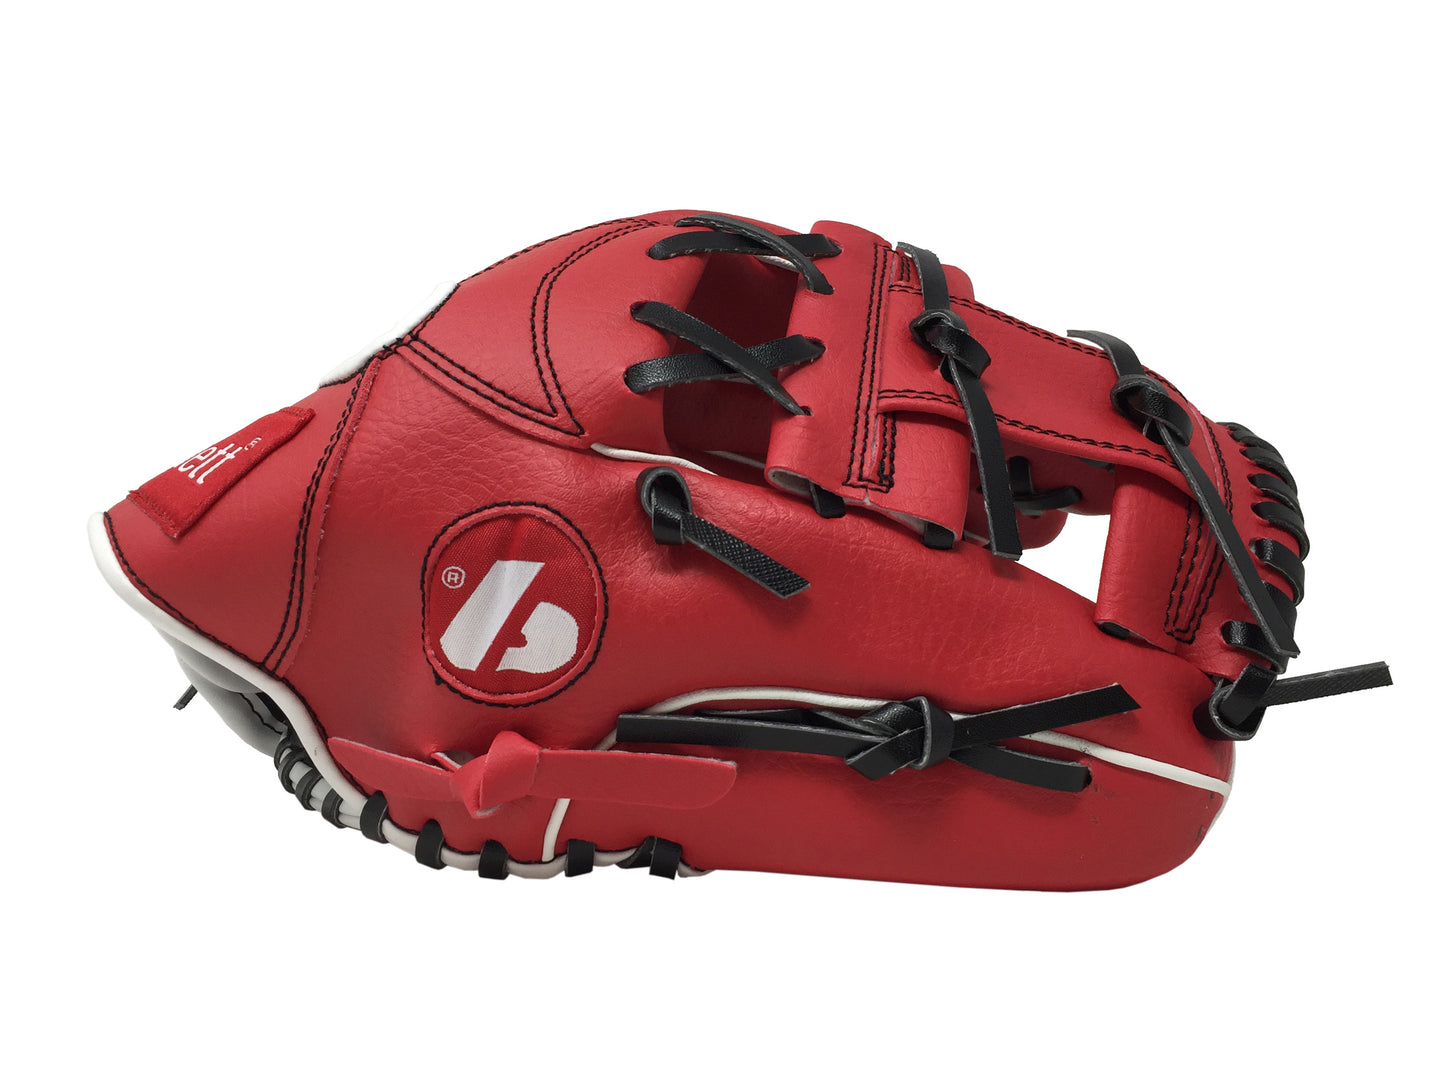 JL-115 – baseball gloves, outfiled, 11,5", RED